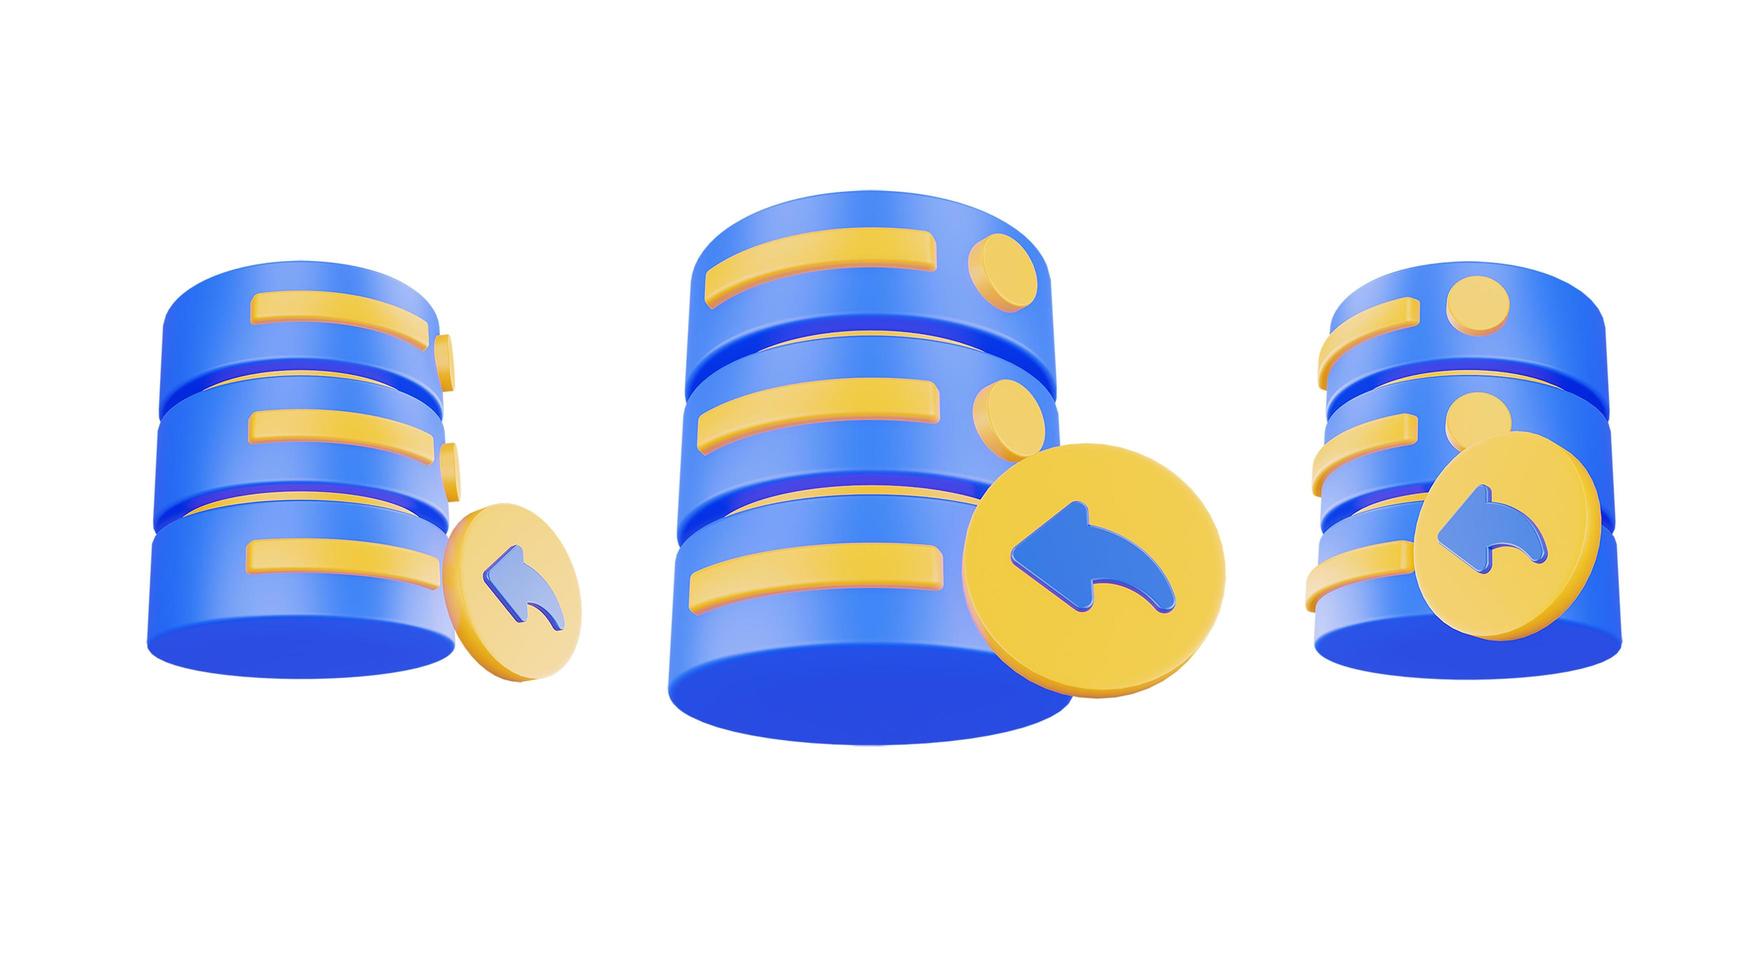 3d render database server icon with previous icon isolated photo